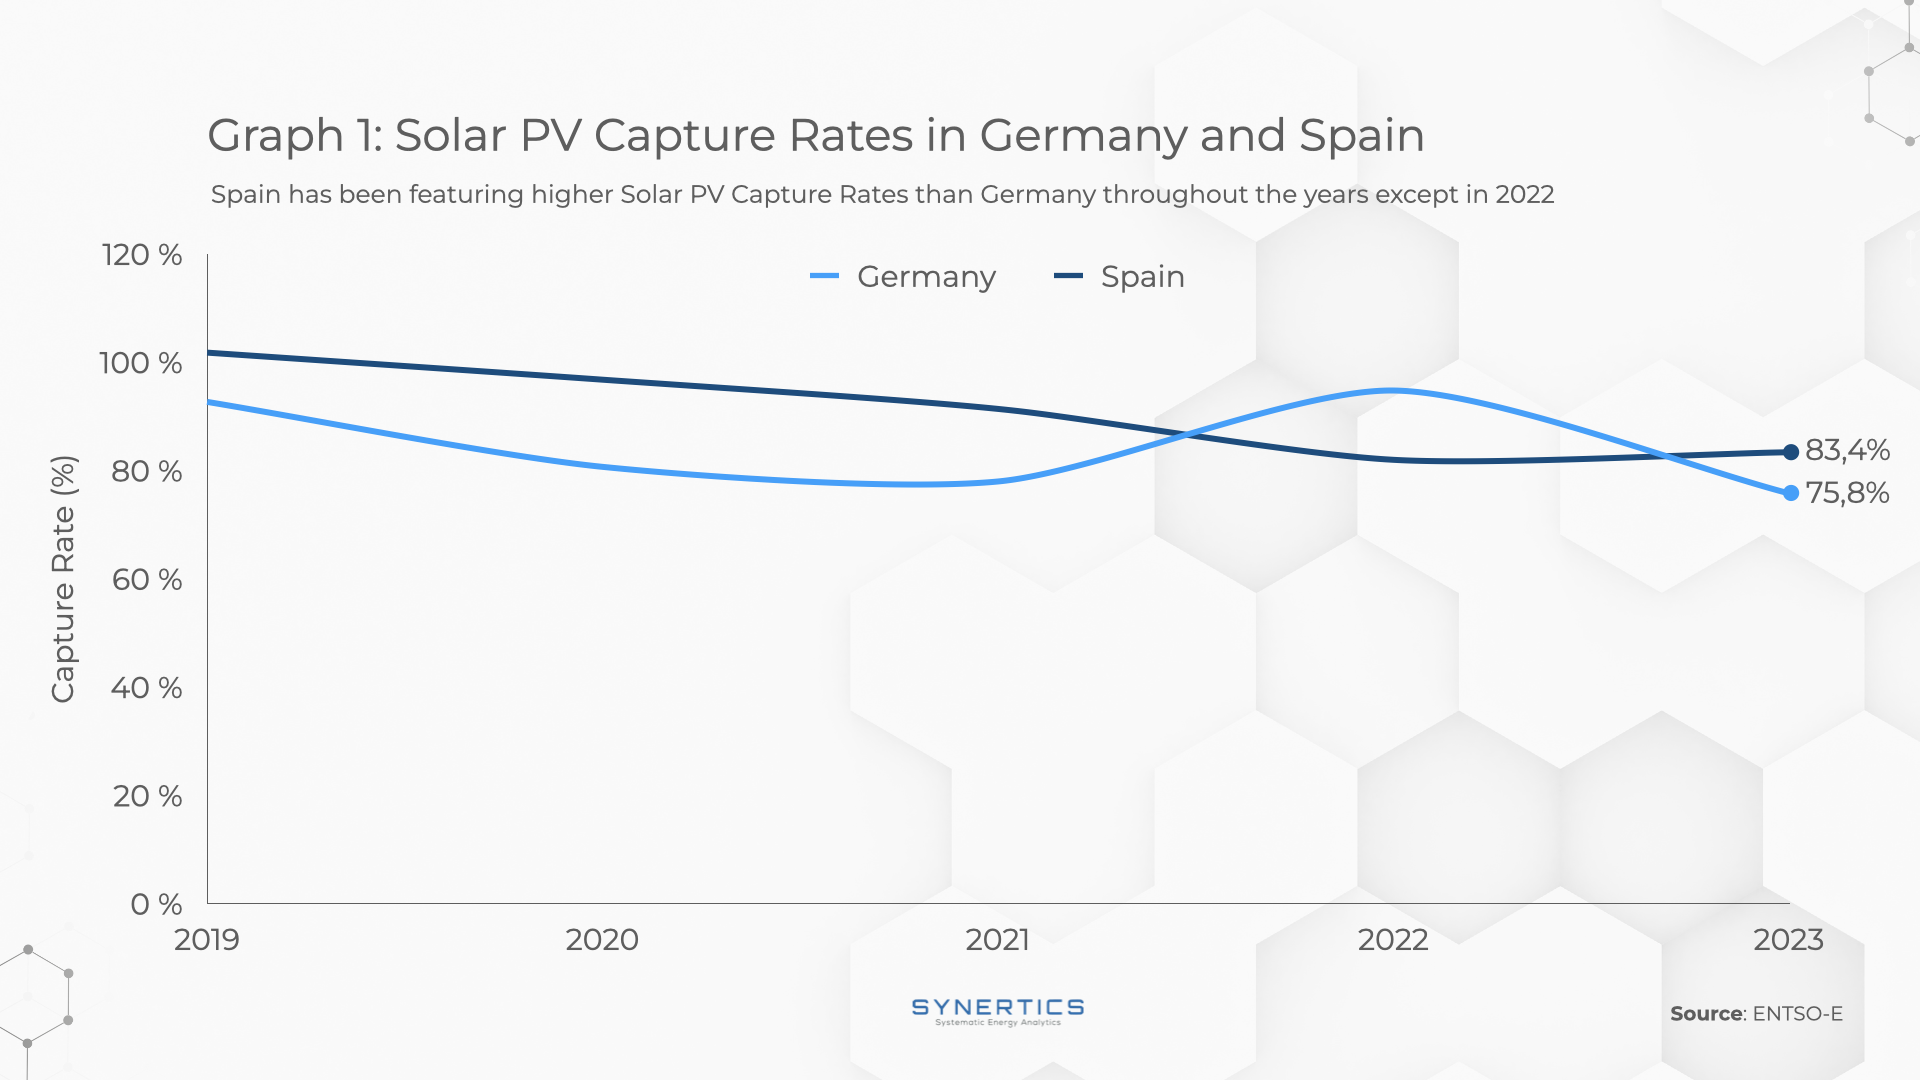 Solar PV Capture Rates in Germany and Spain